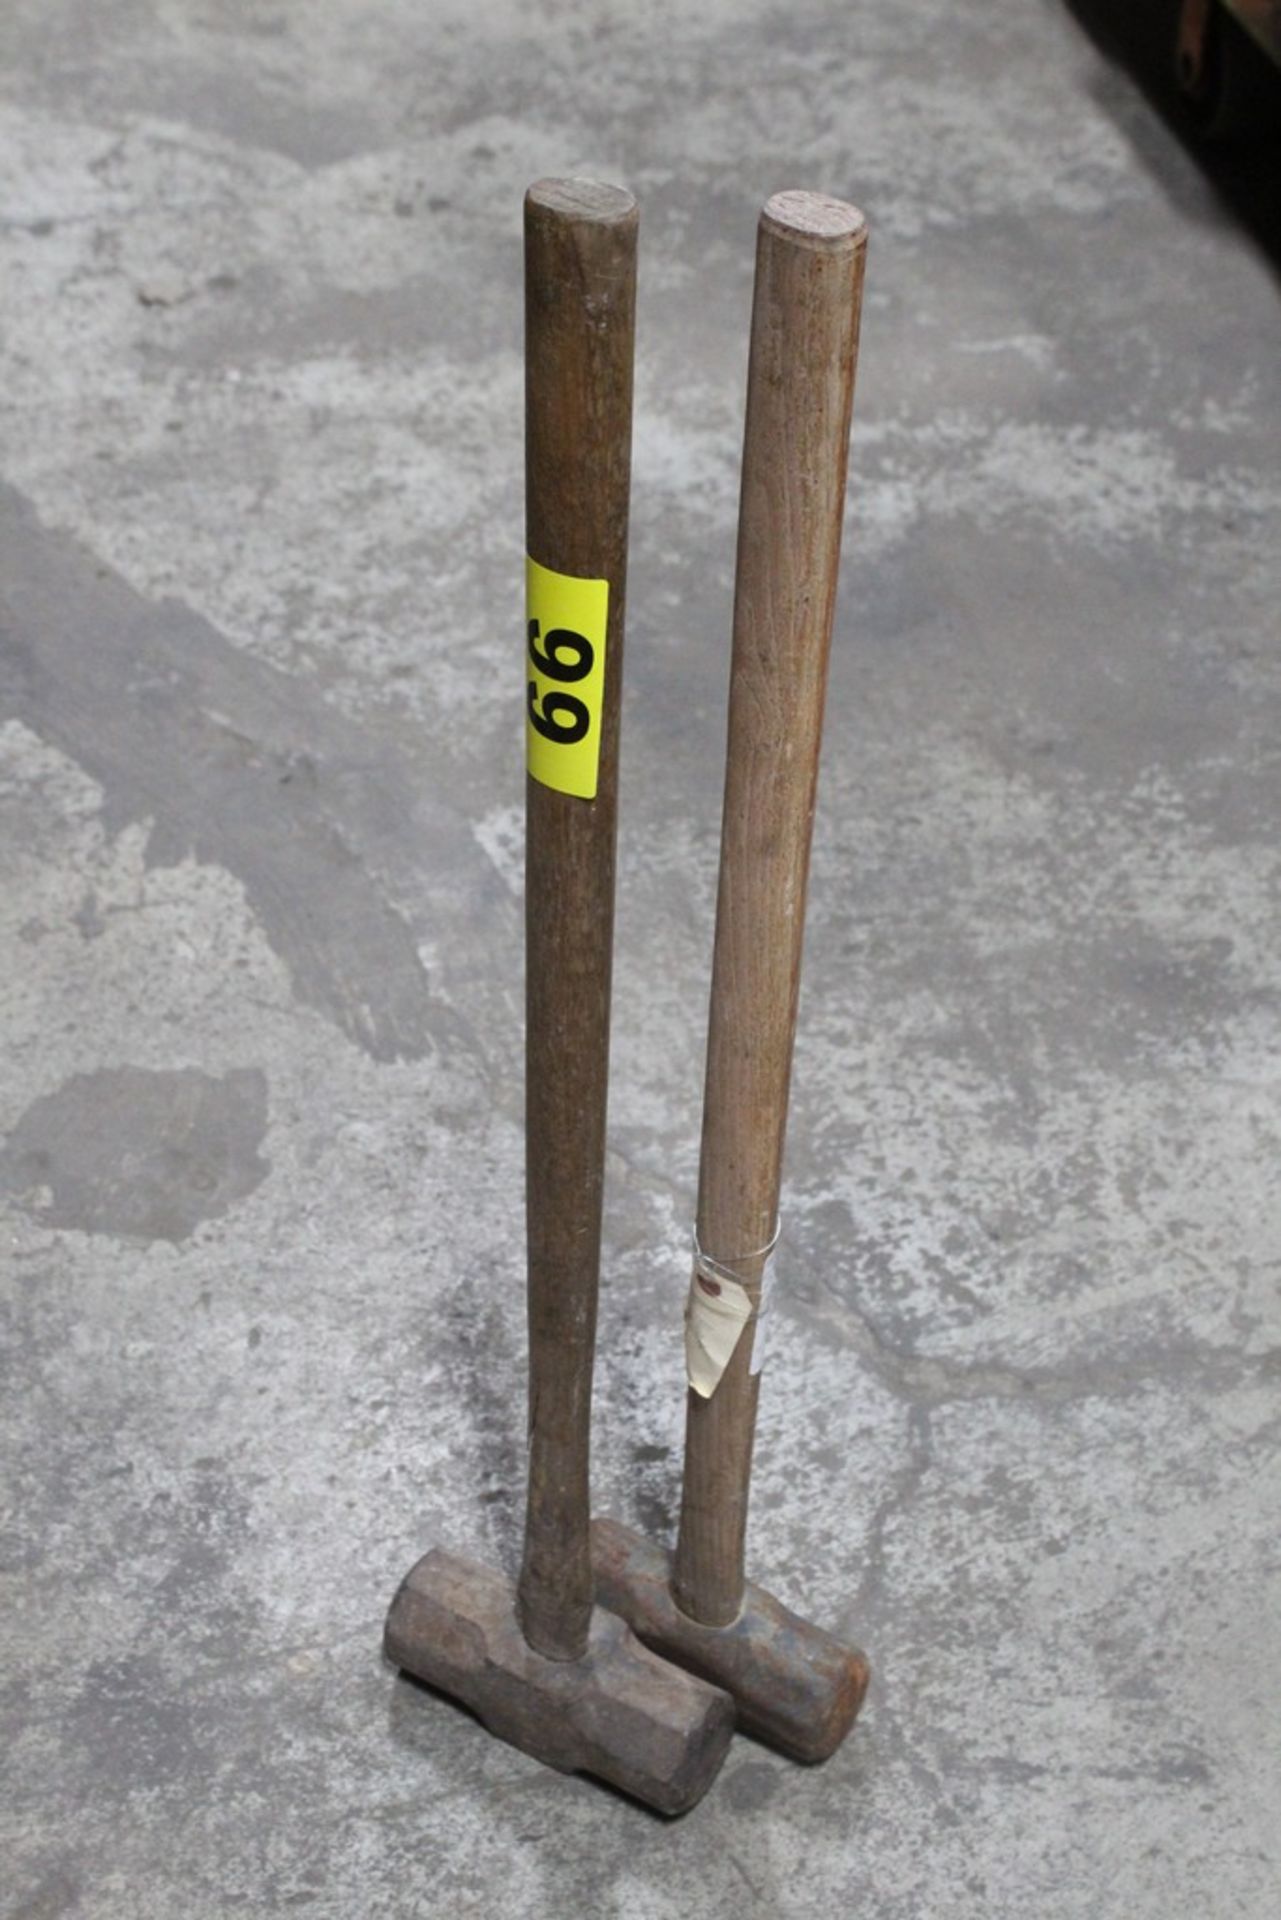 (2) SLEDGE HAMMERS WITH WOOD HANDLES